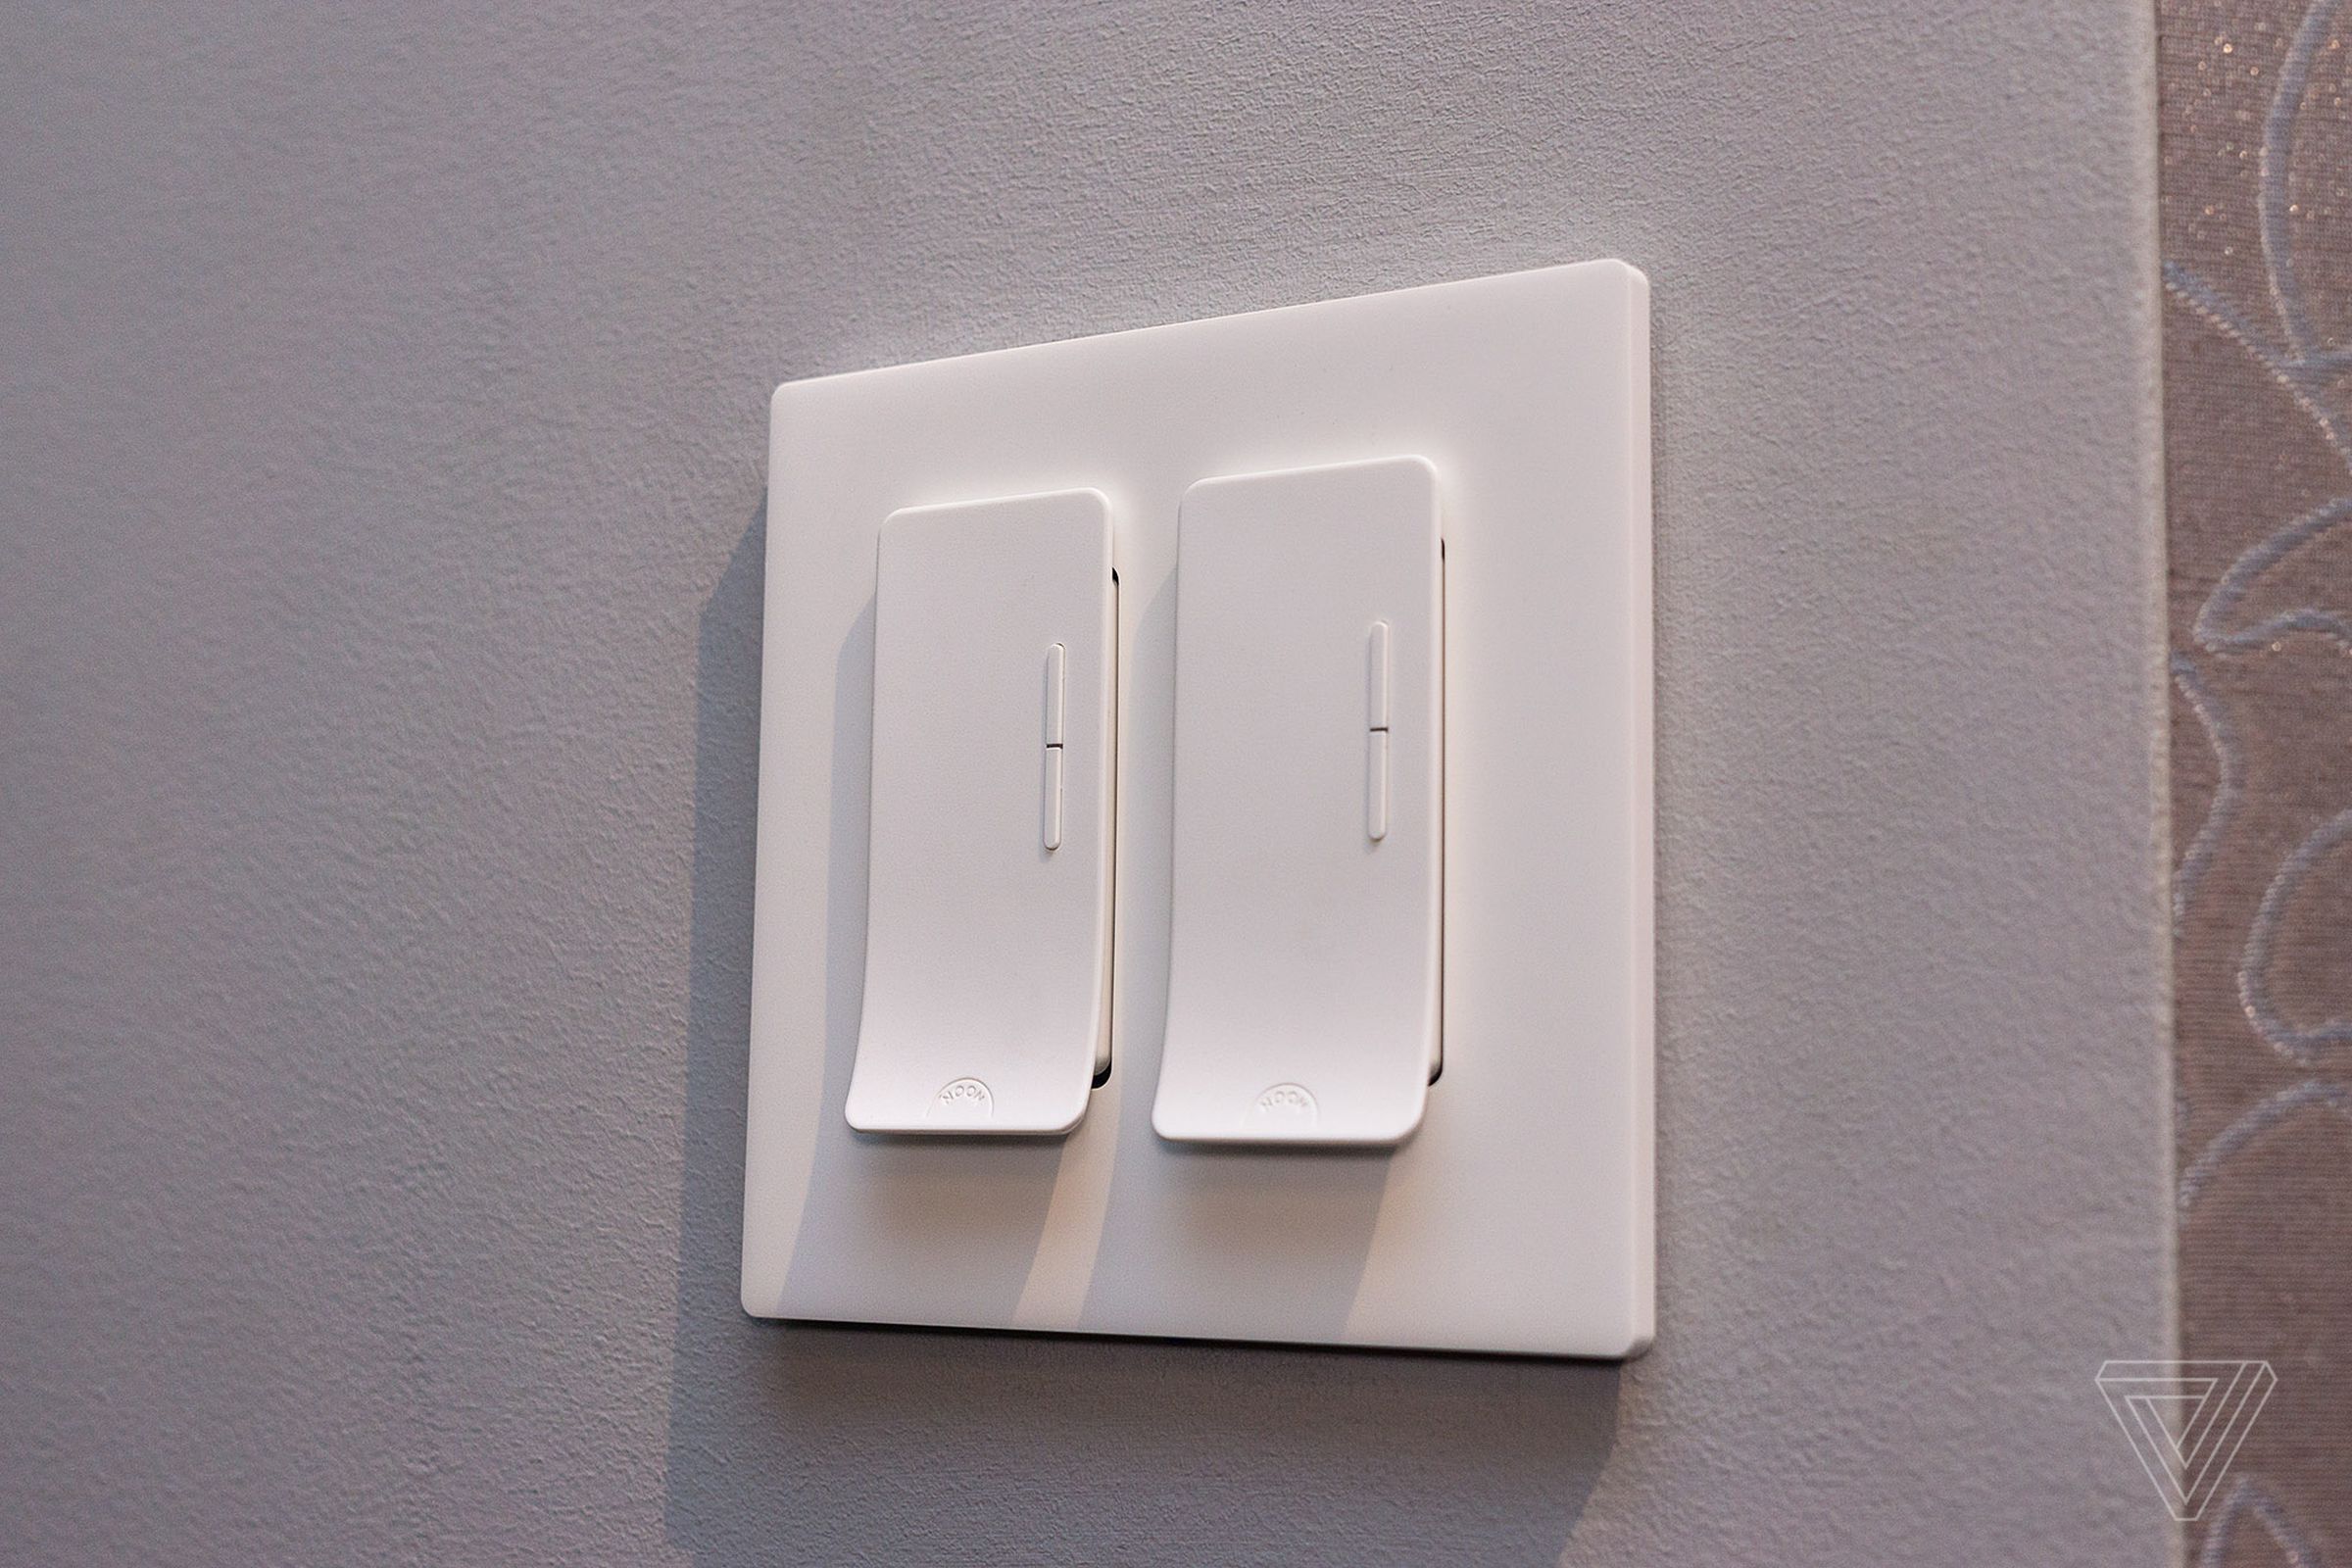 Noon extension switches